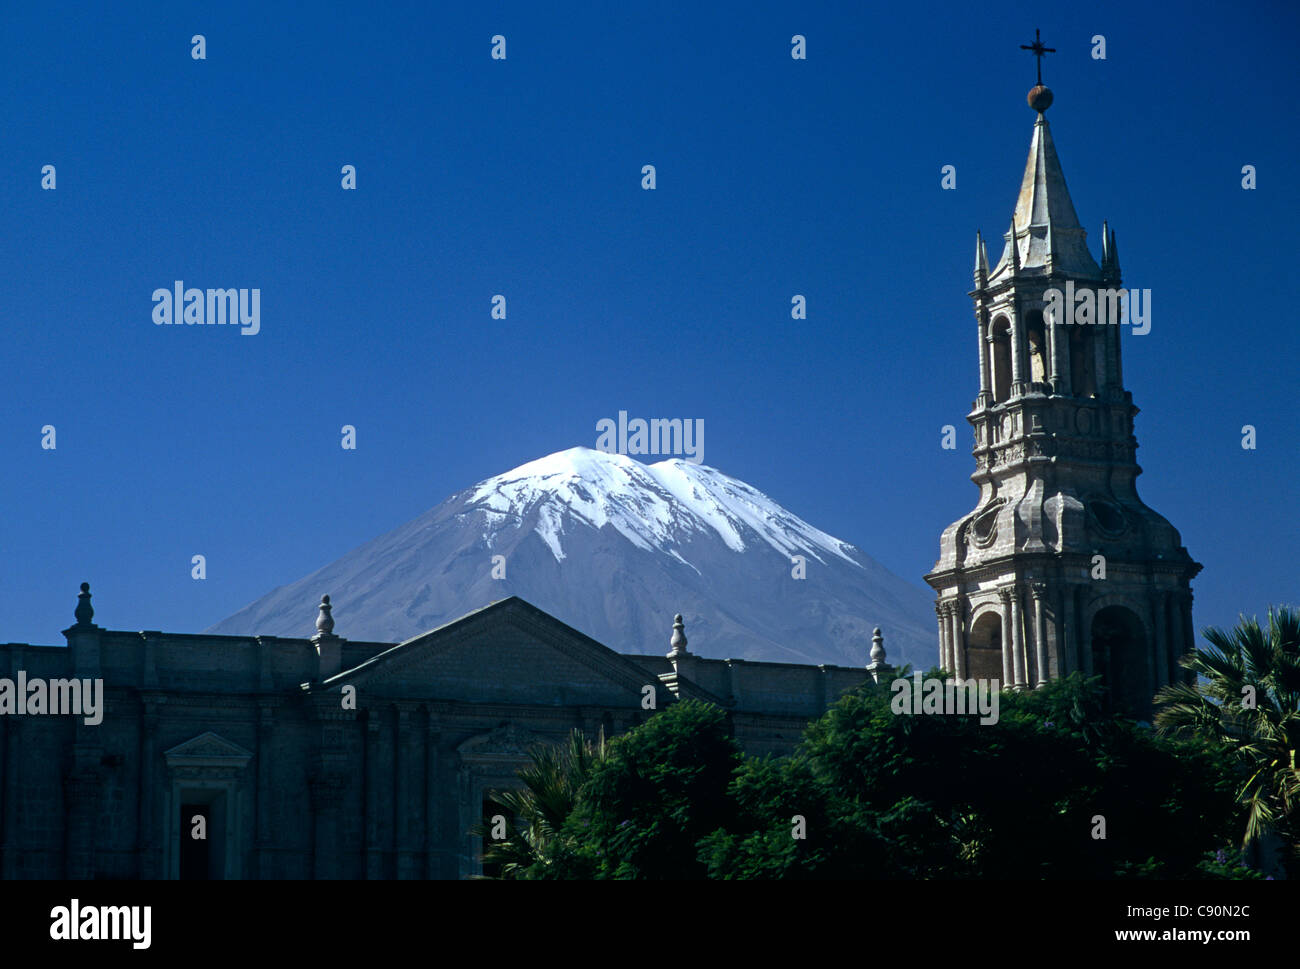 Arequipa lies in the Andes mountains at an altitude of 2 380 meters 7 800 feet above sea level. The snow-capped volcano El Stock Photo